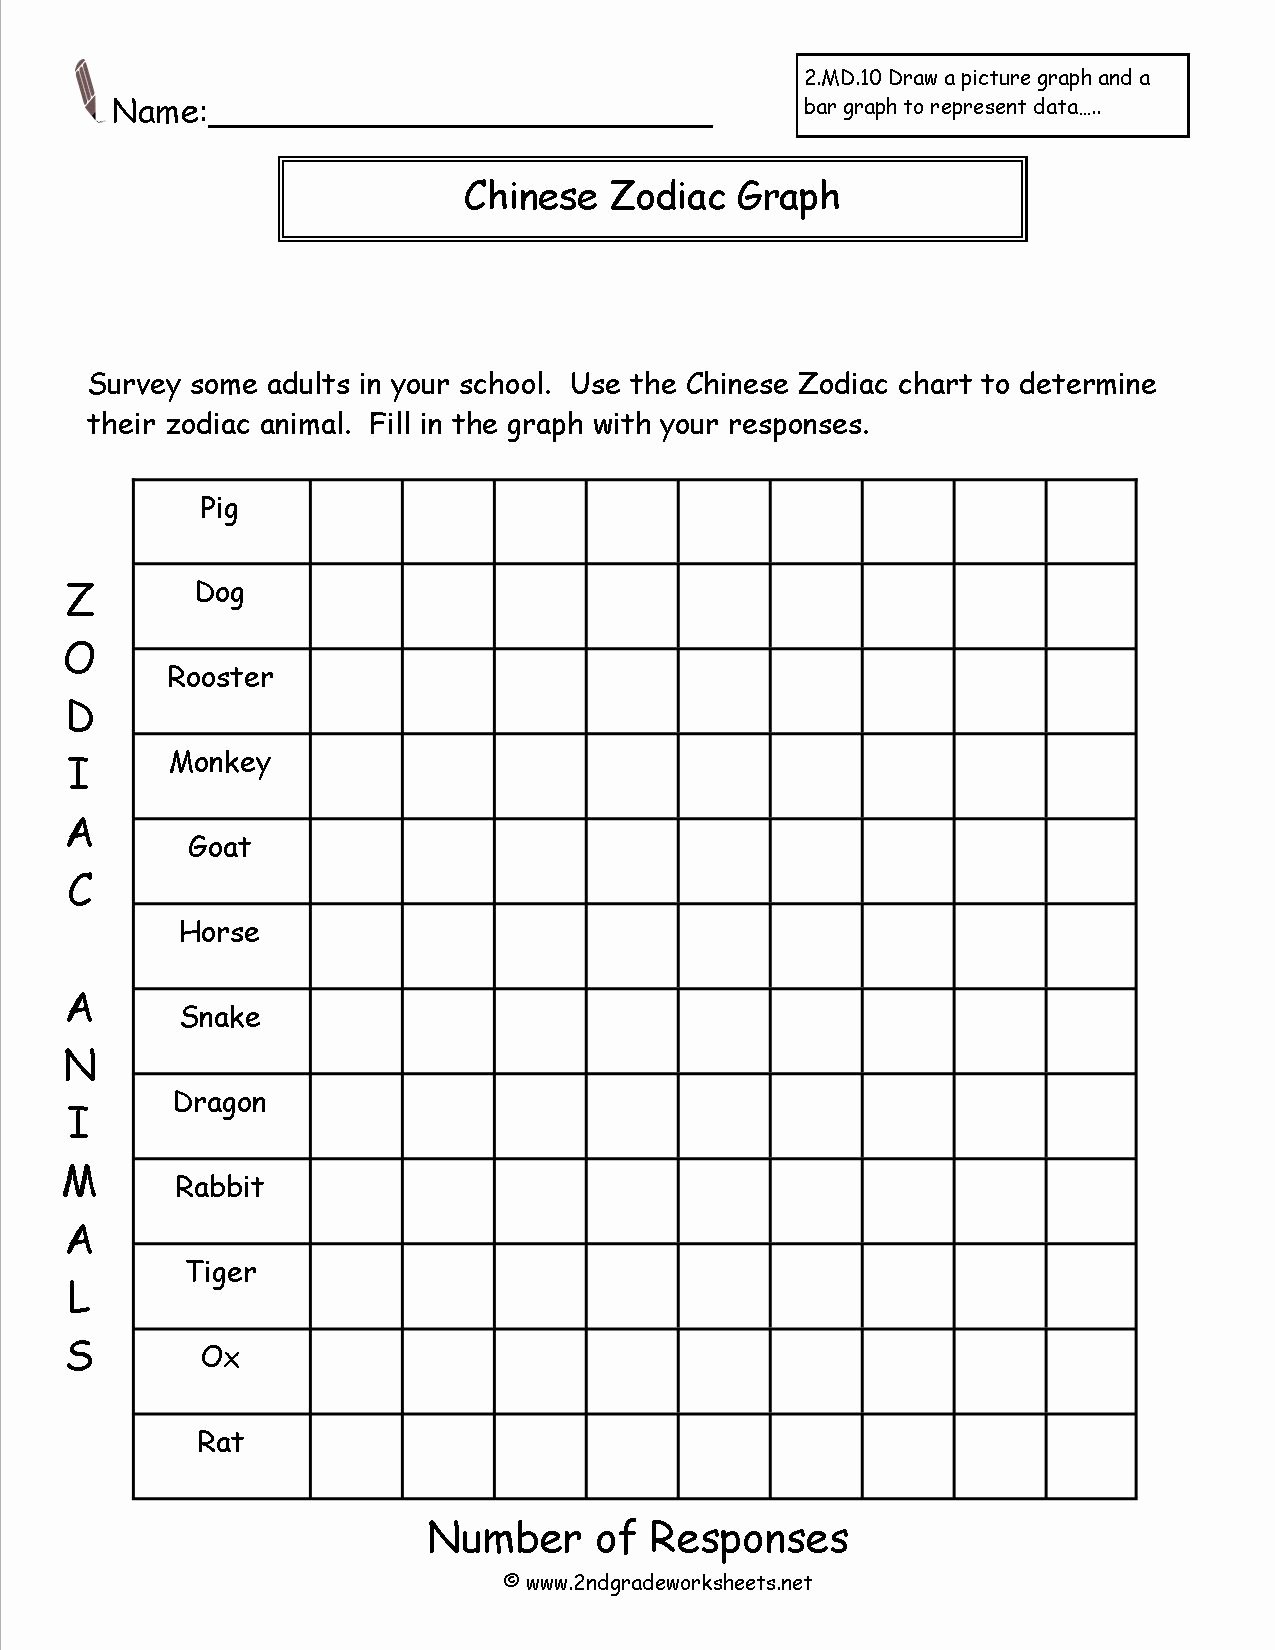 Bar Graph Worksheets Best Of Ccss 2 Md 10 Worksheets Represent and Interpret Data